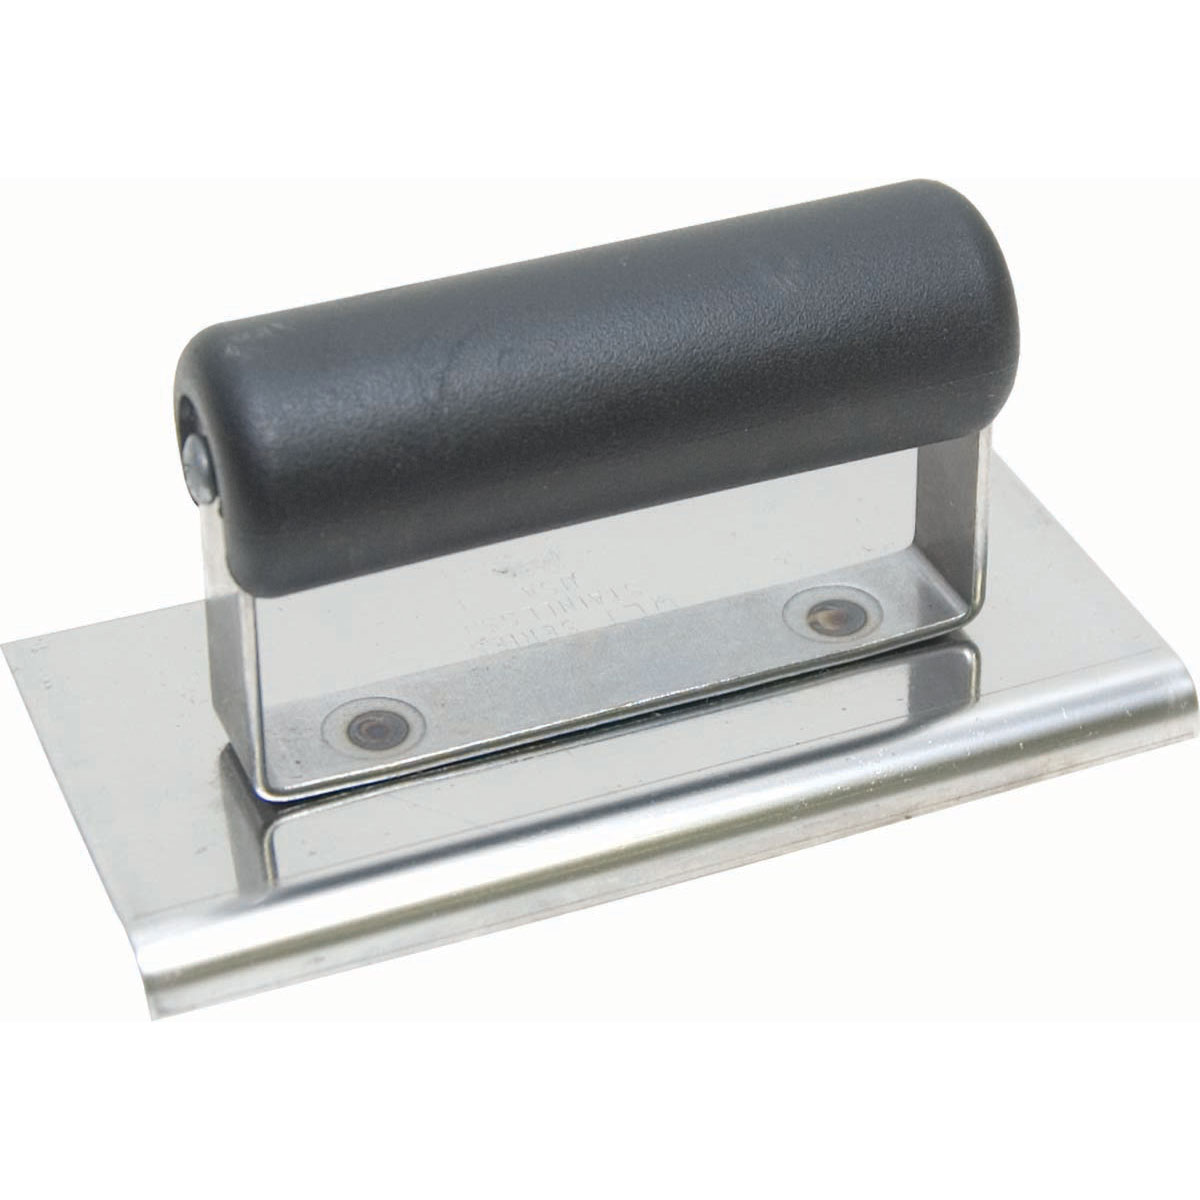 Marshalltown - QLT CE504SP 6in x 3in Stainless Steel Edger; 1/4R, 3/8L-Plastic Handle CE504SP